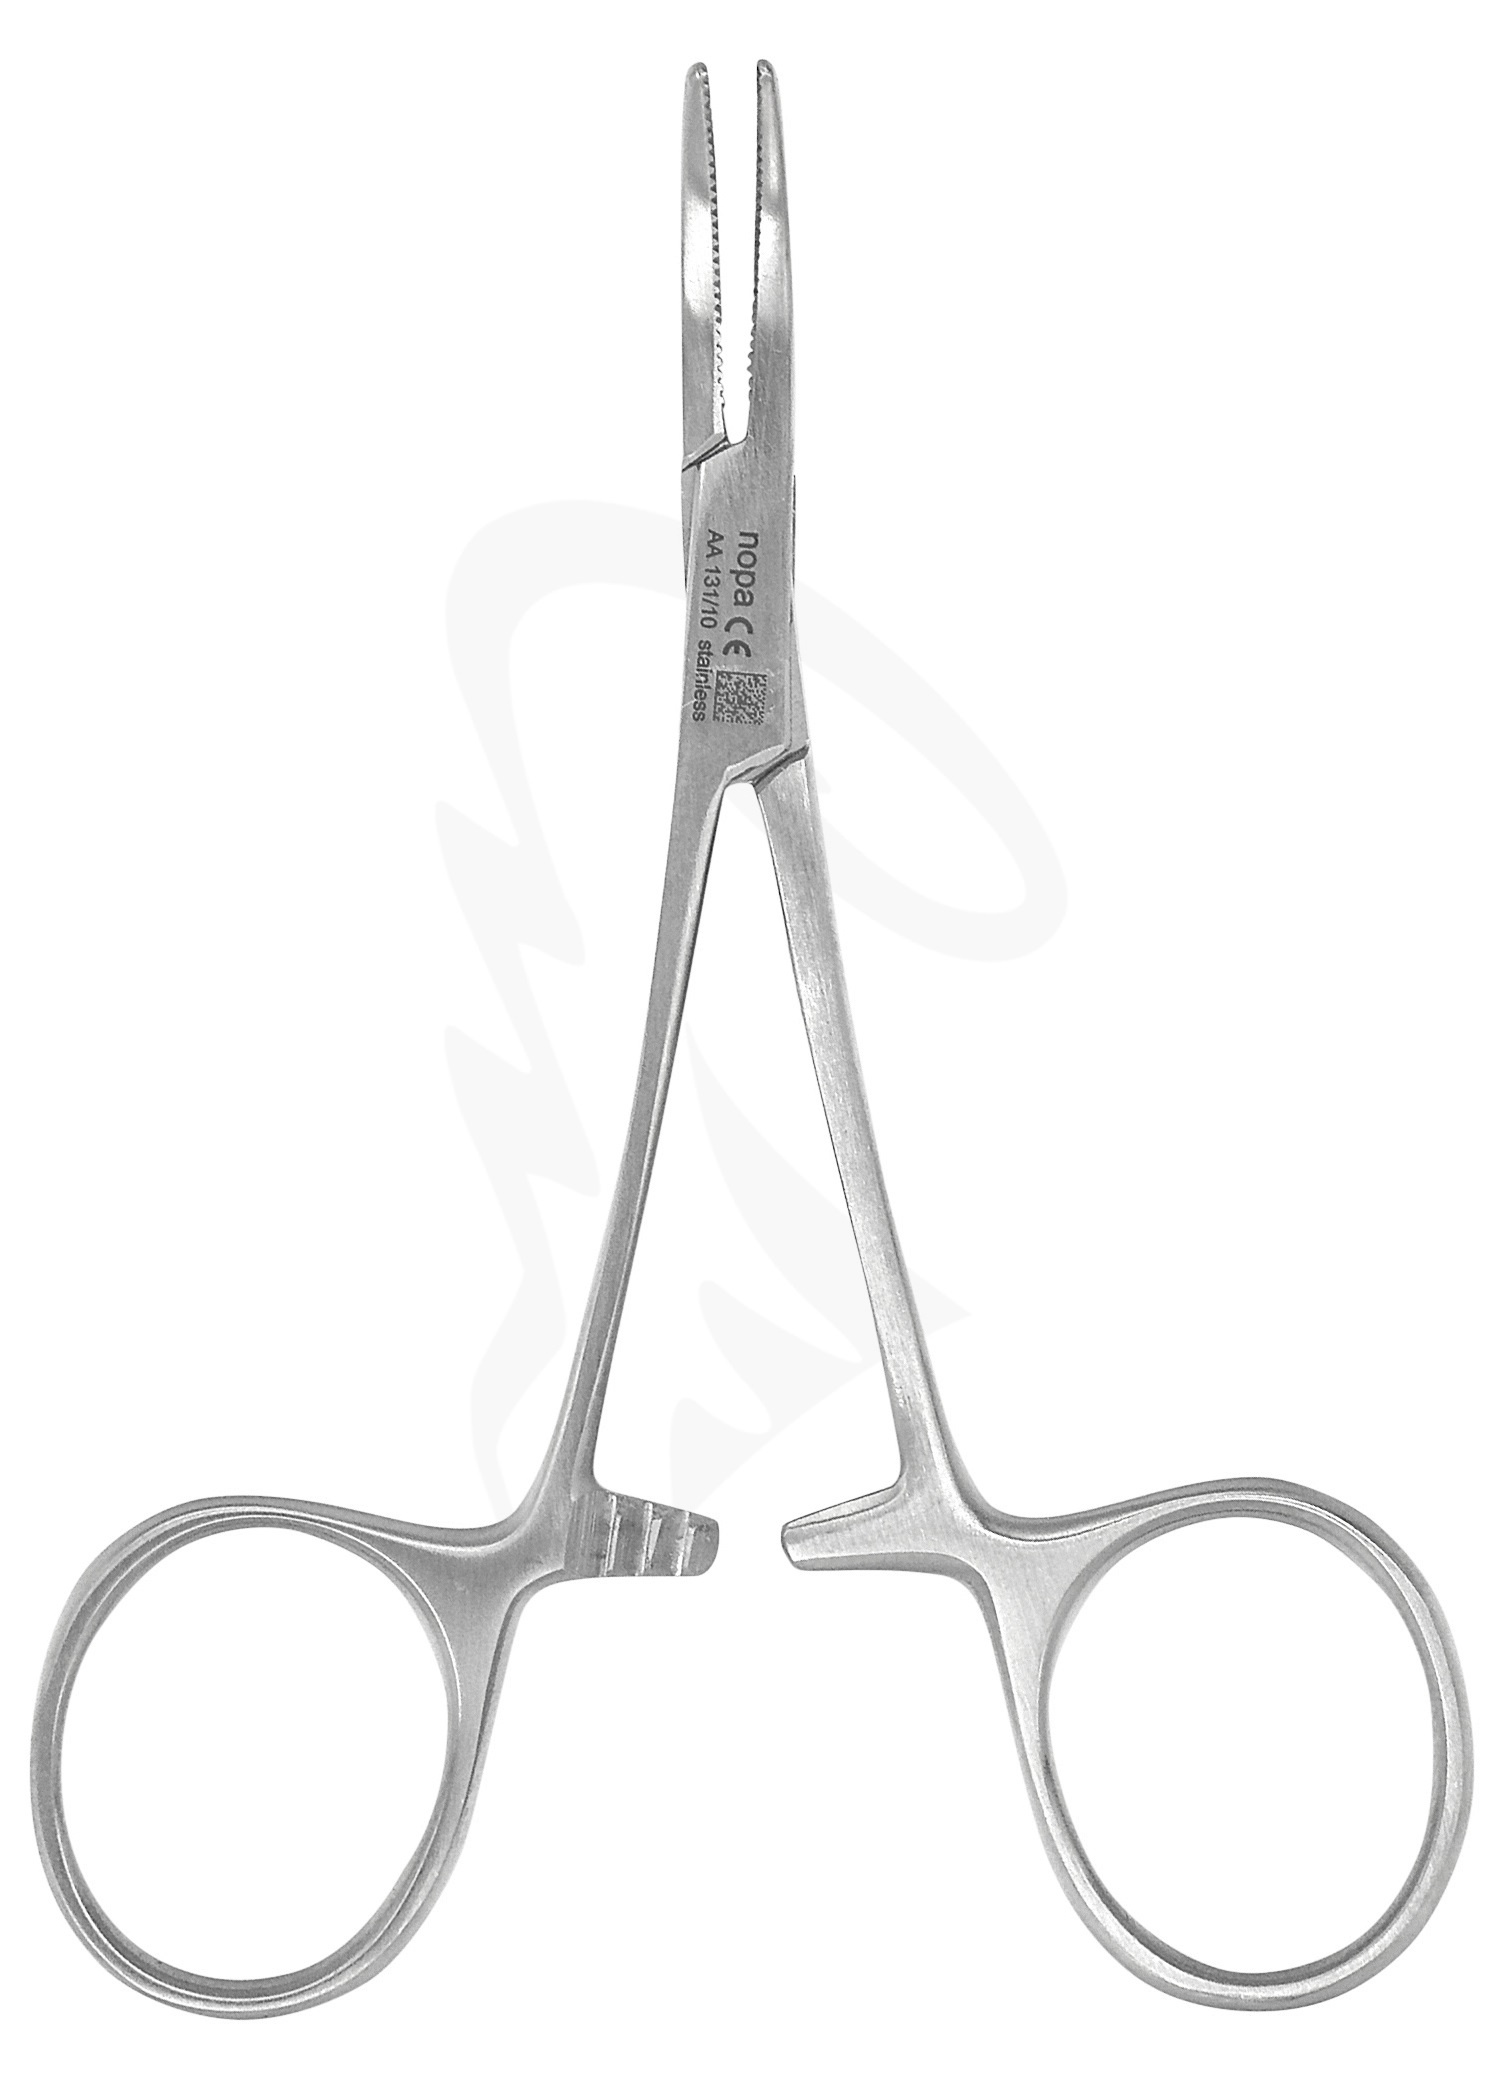 Nopa Micro-Mosquito Fine Forcep Curved 10cm image 0